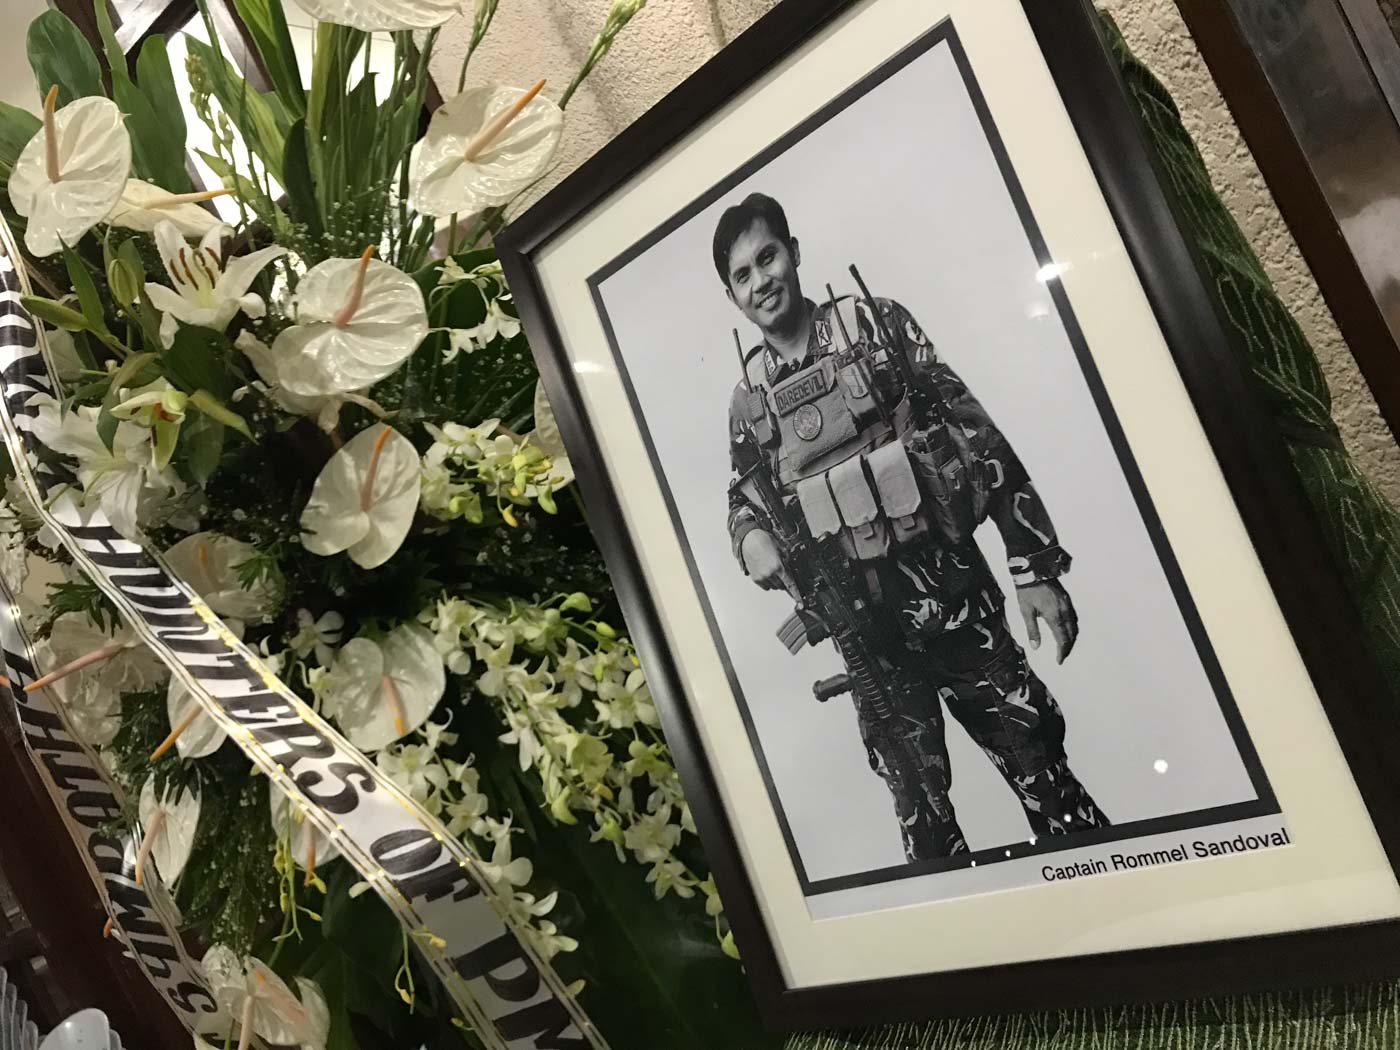 'DAREDEVIL.' Captain Rommel Sandoval's courage was 'above and beyond the call of duty,' his superiors say. Photo by Franz Lopez/Rappler  